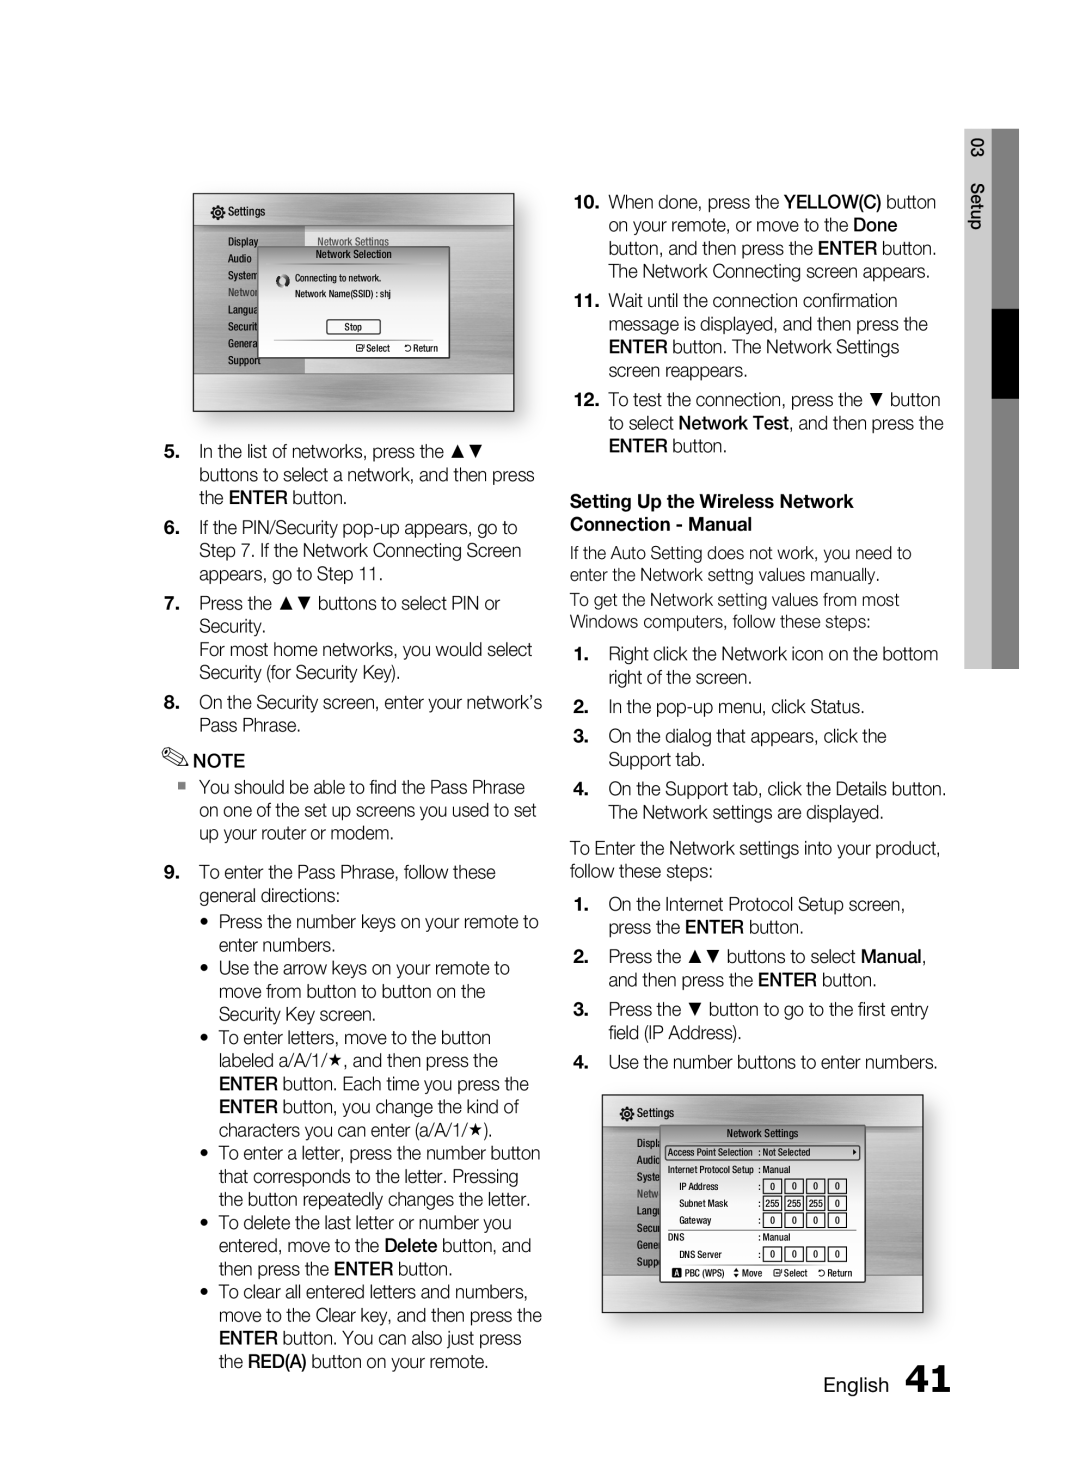 Samsung HT-C6730W, AH68-02290S user manual English, Setting Up the Wireless Network, Connection - Manual 